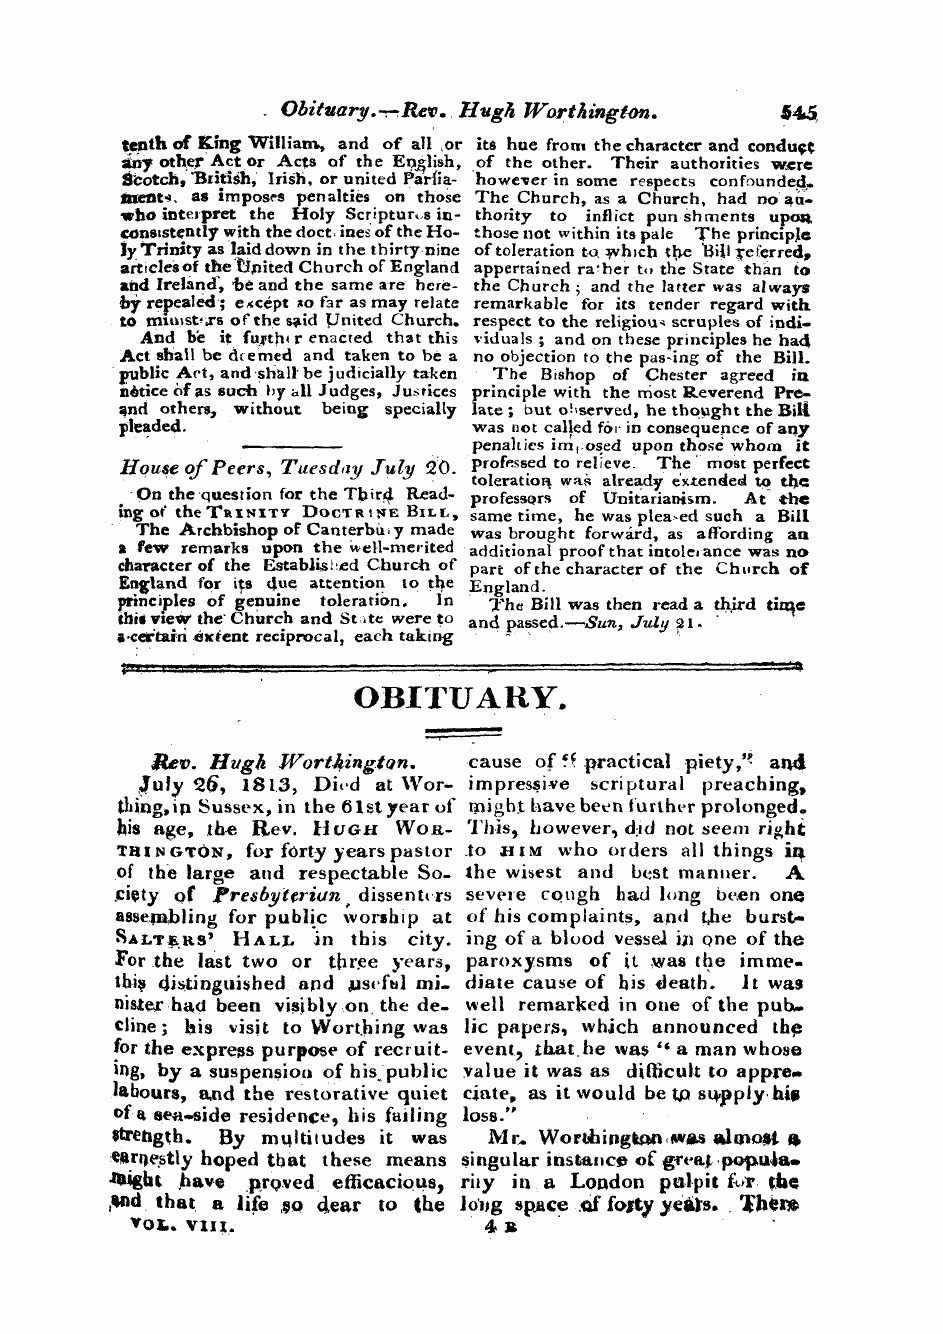 Monthly Repository (1806-1838) and Unitarian Chronicle (1832-1833): F Y, 1st edition - Untitled Article